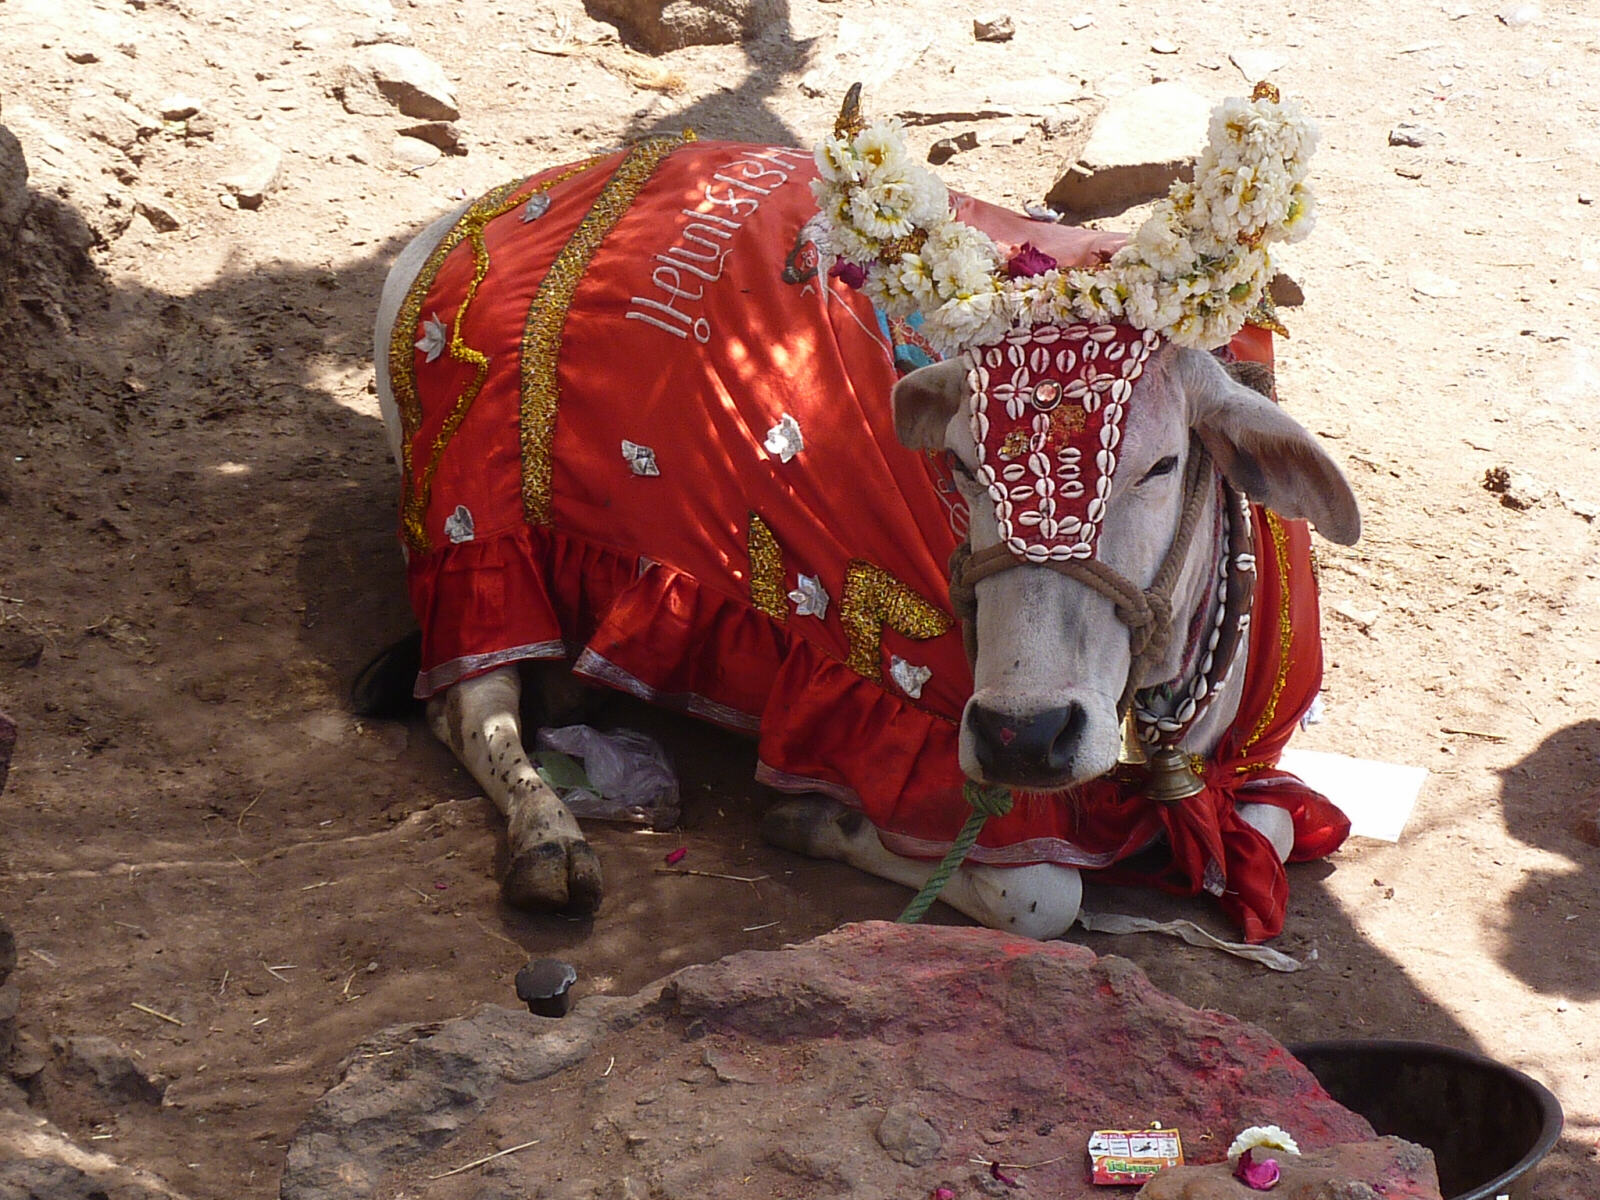 A dressed-up sacred cow in Pavagadh, Champaner, India